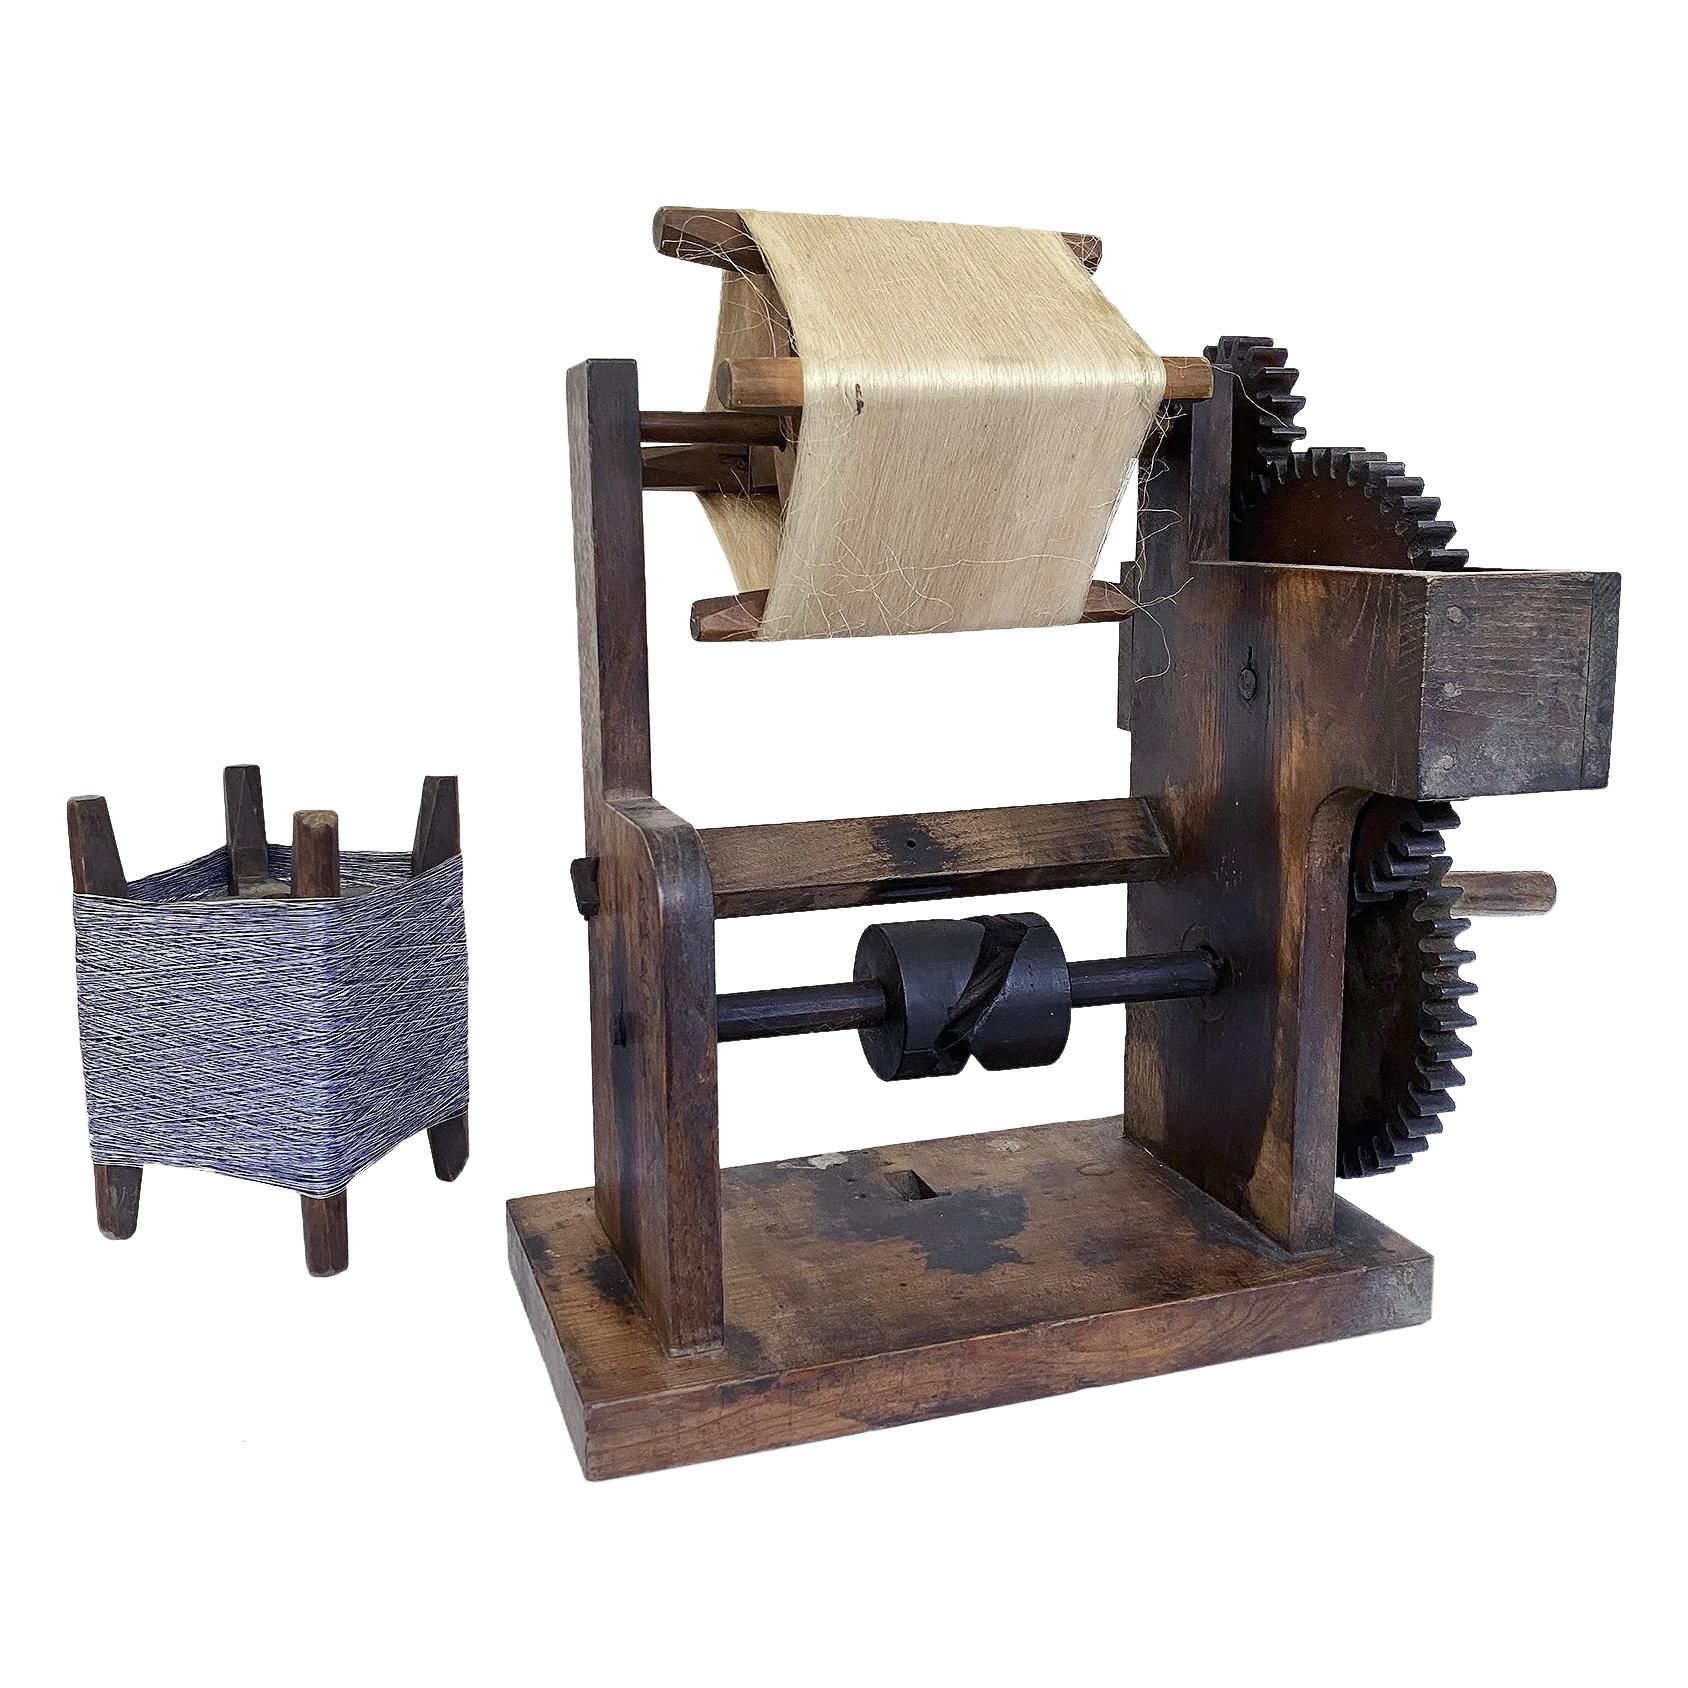 Japanese Silk Thread Wood Winder Complete with Spool and Functioning Gears For Sale